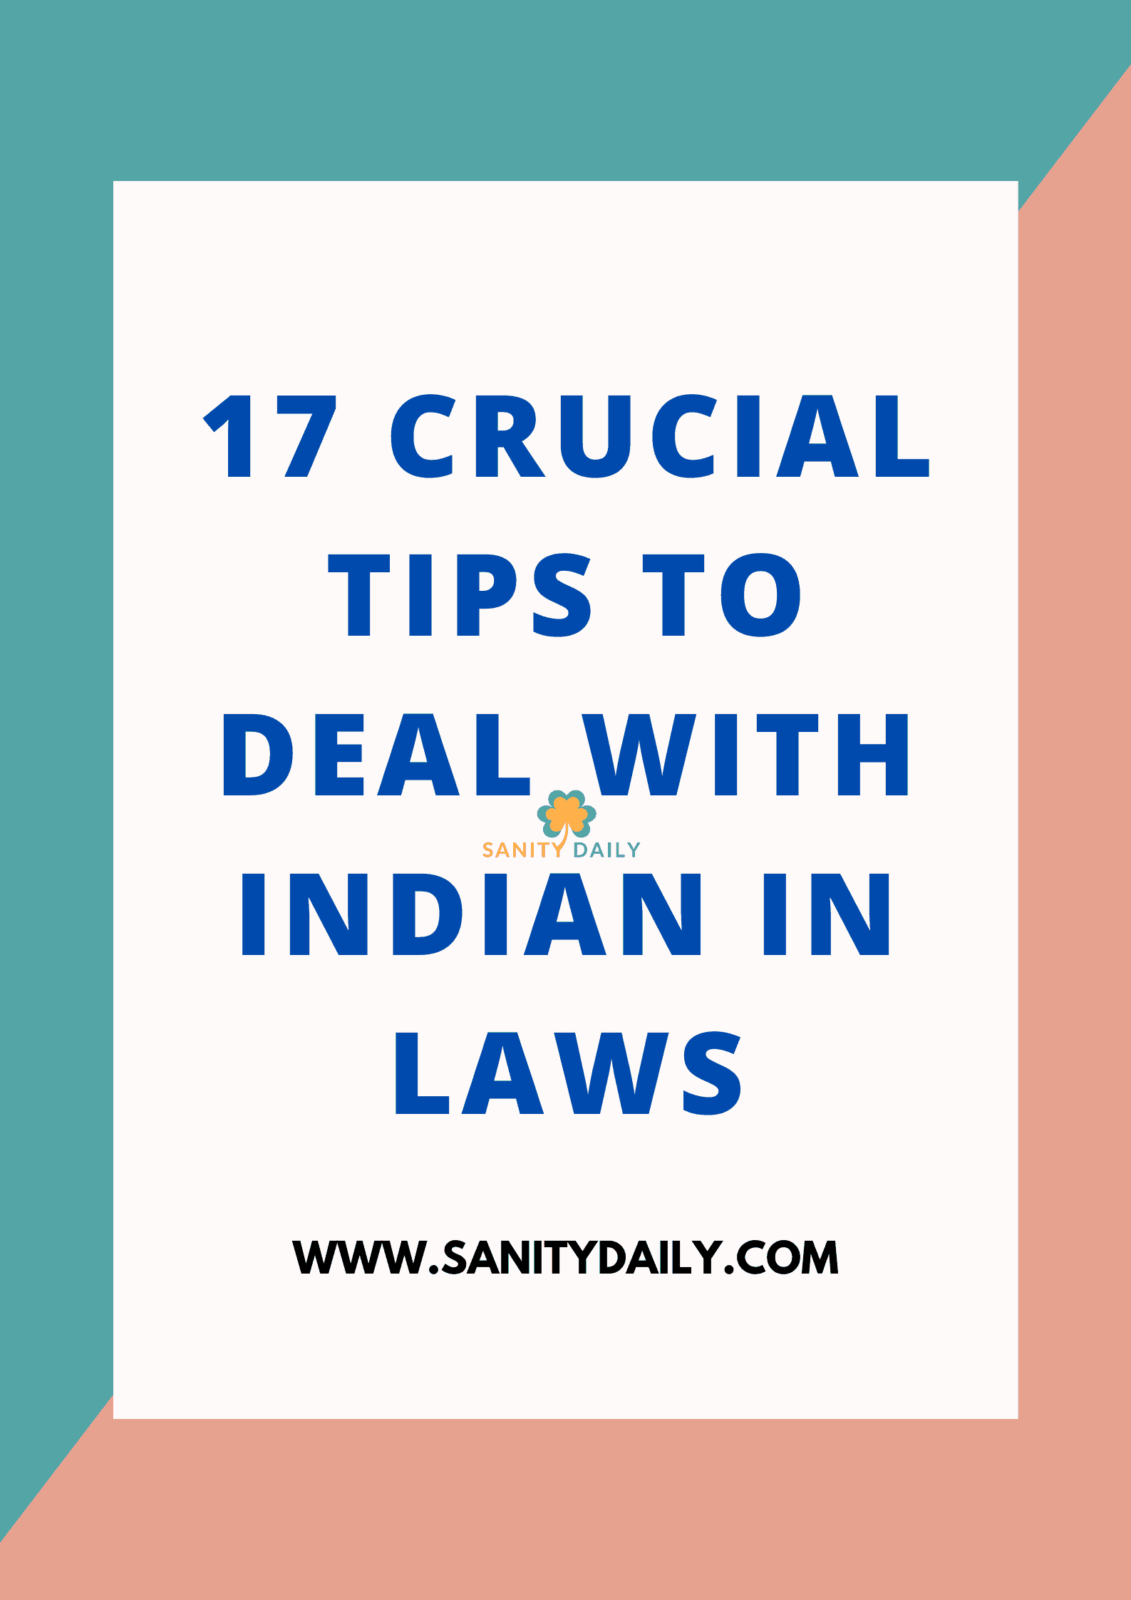 Tips to deal with Indian in laws